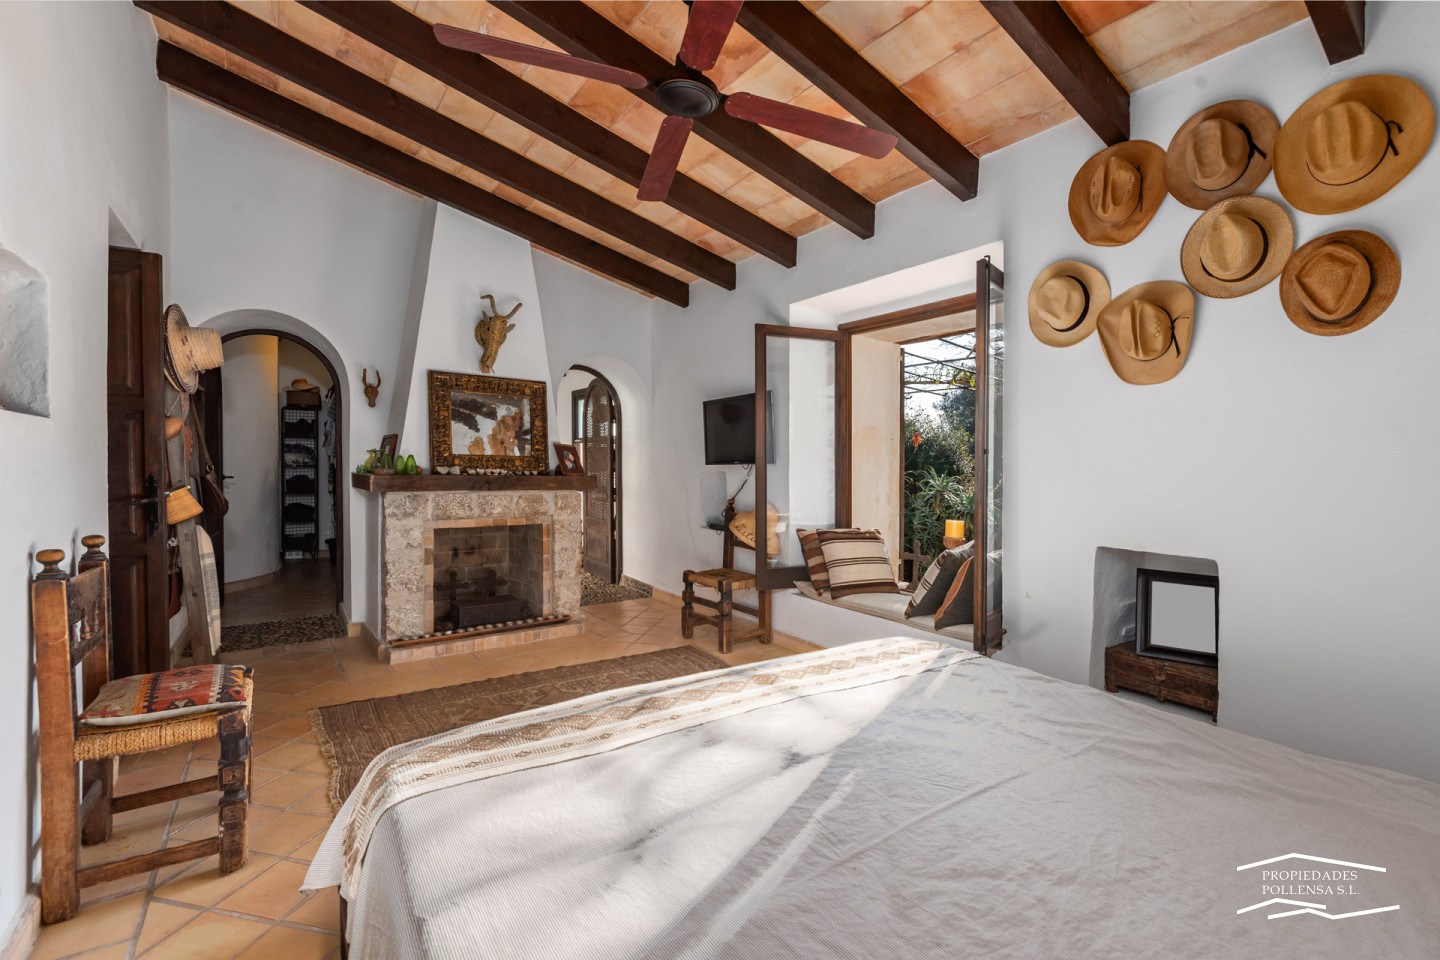 TRADITIONAL FINCA IN PUERTO POLLENSA, A5 MINUTES TO THE BEACH.